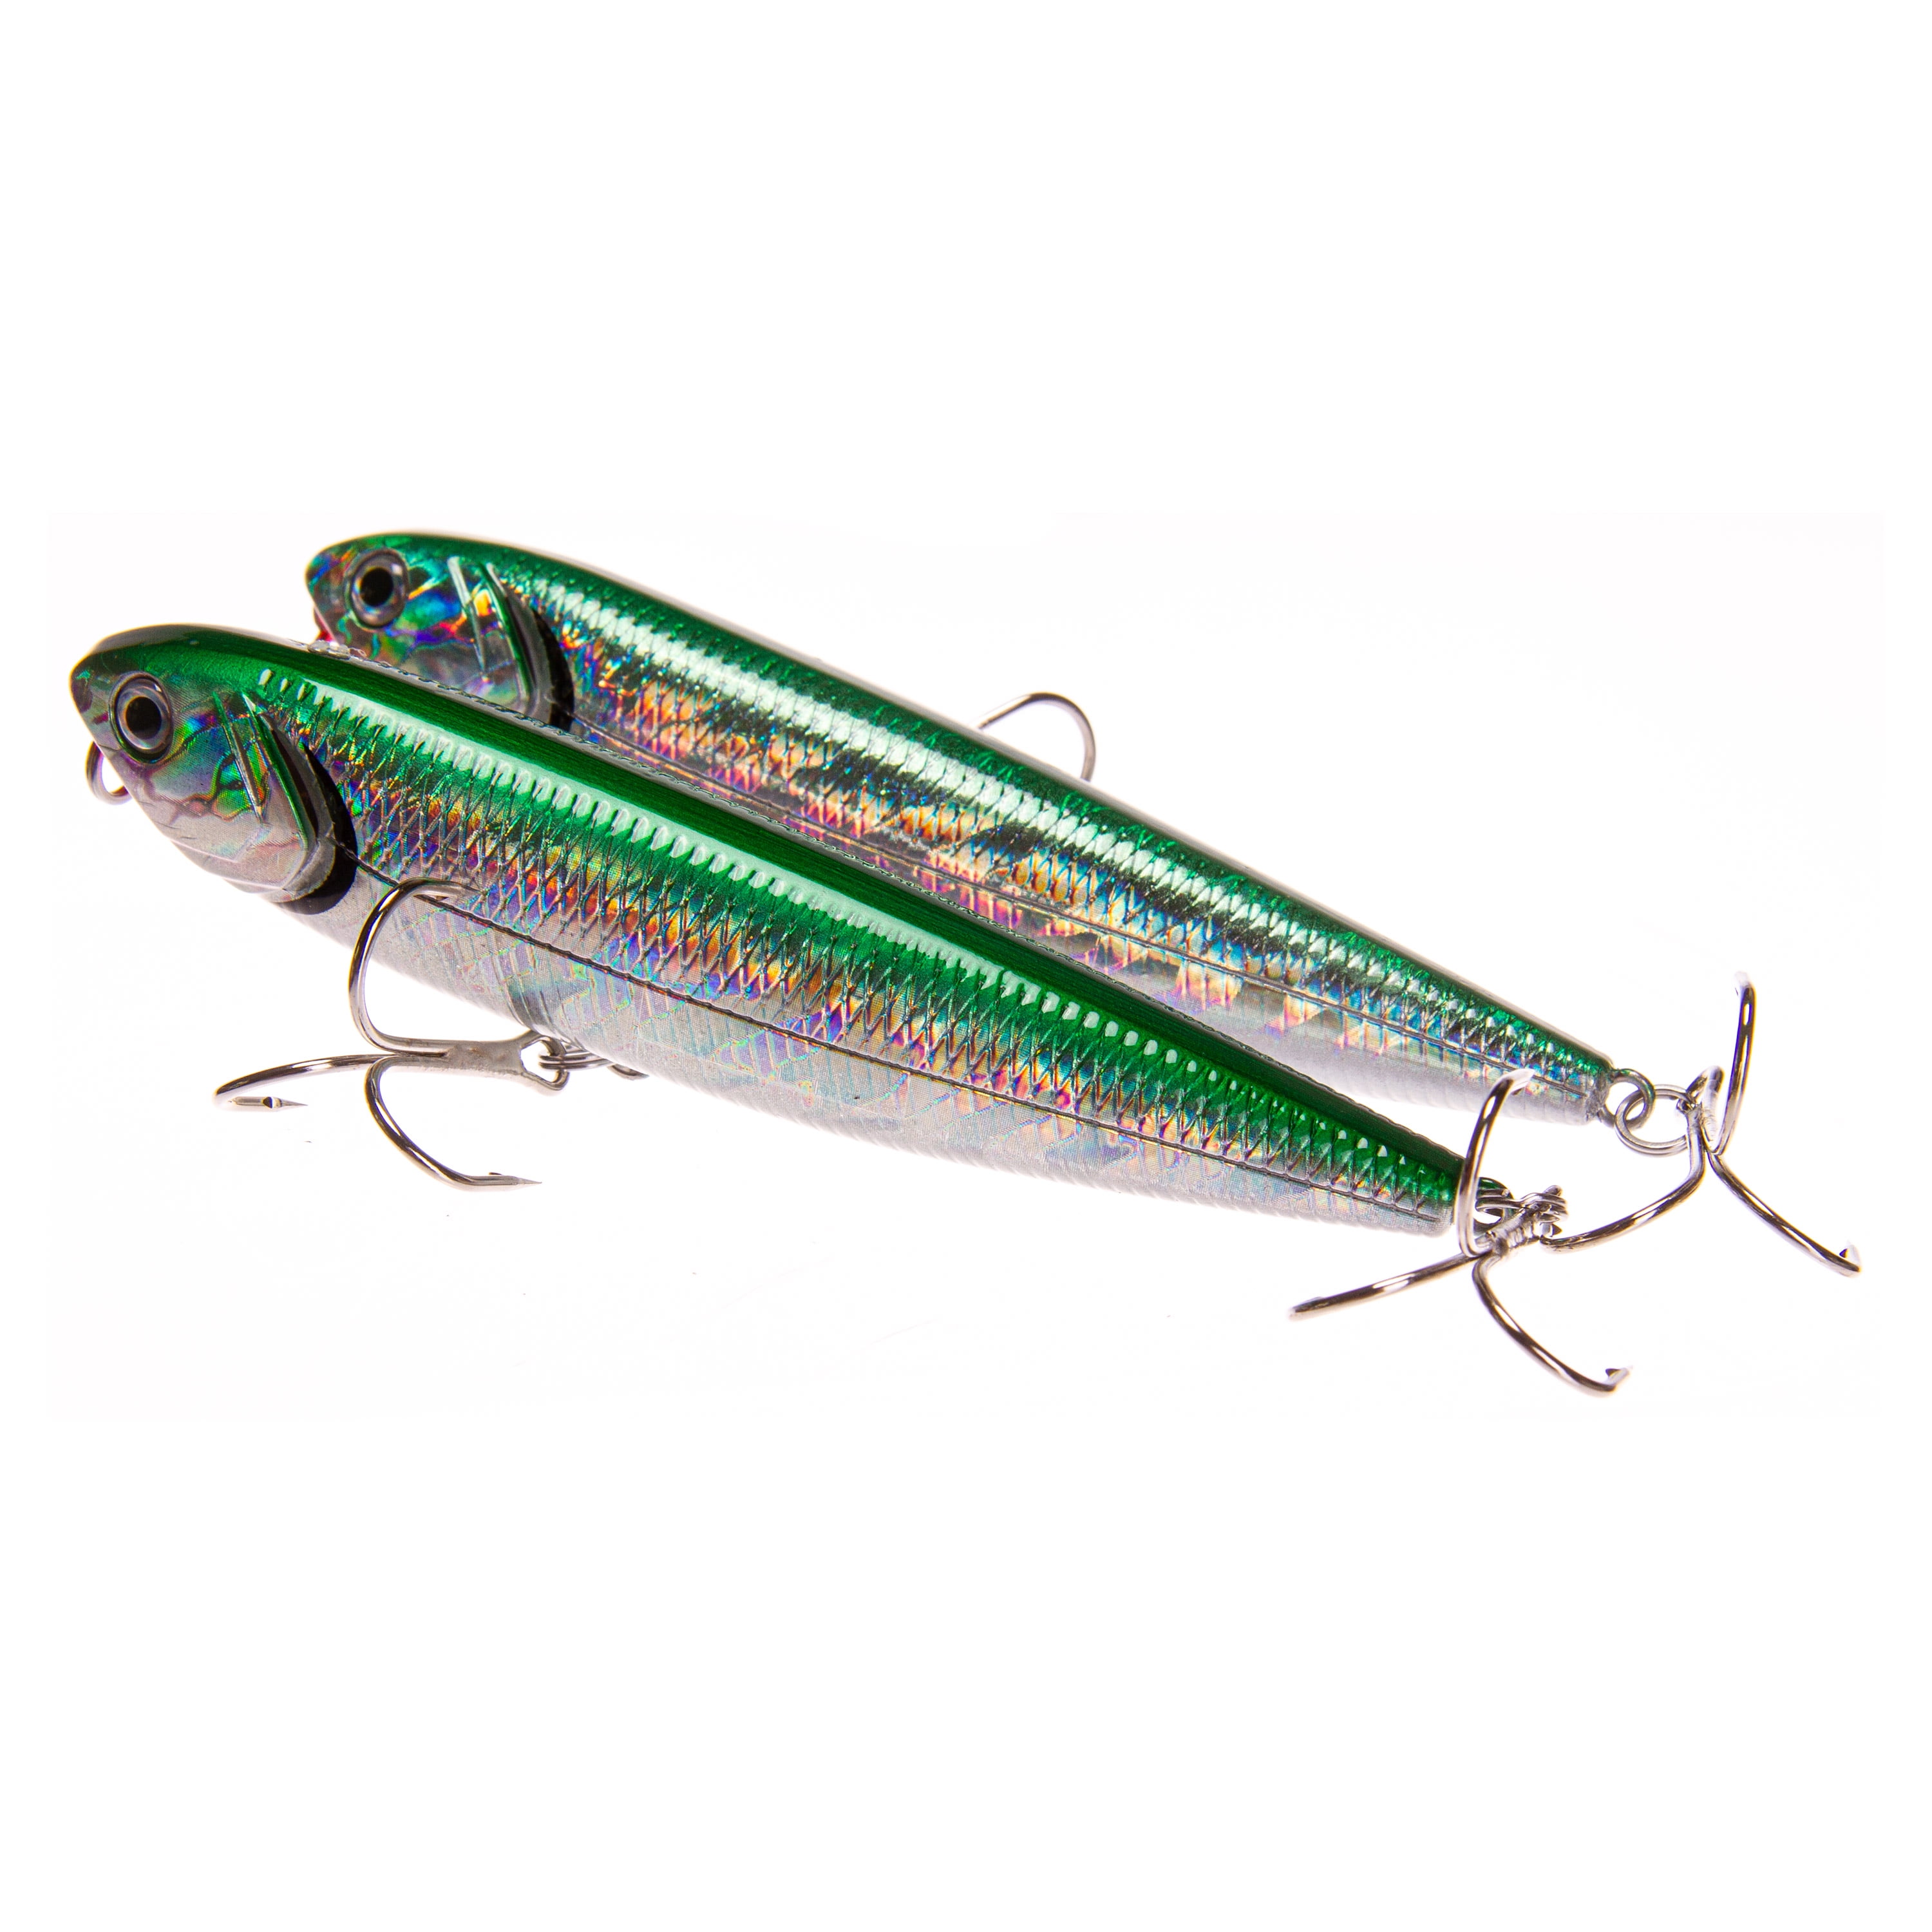 Ozark Trails Hard Plastic Saltwater Inshore Walking Mullet Fishing Lures,  2-pack. Painted in fish attracting colors.